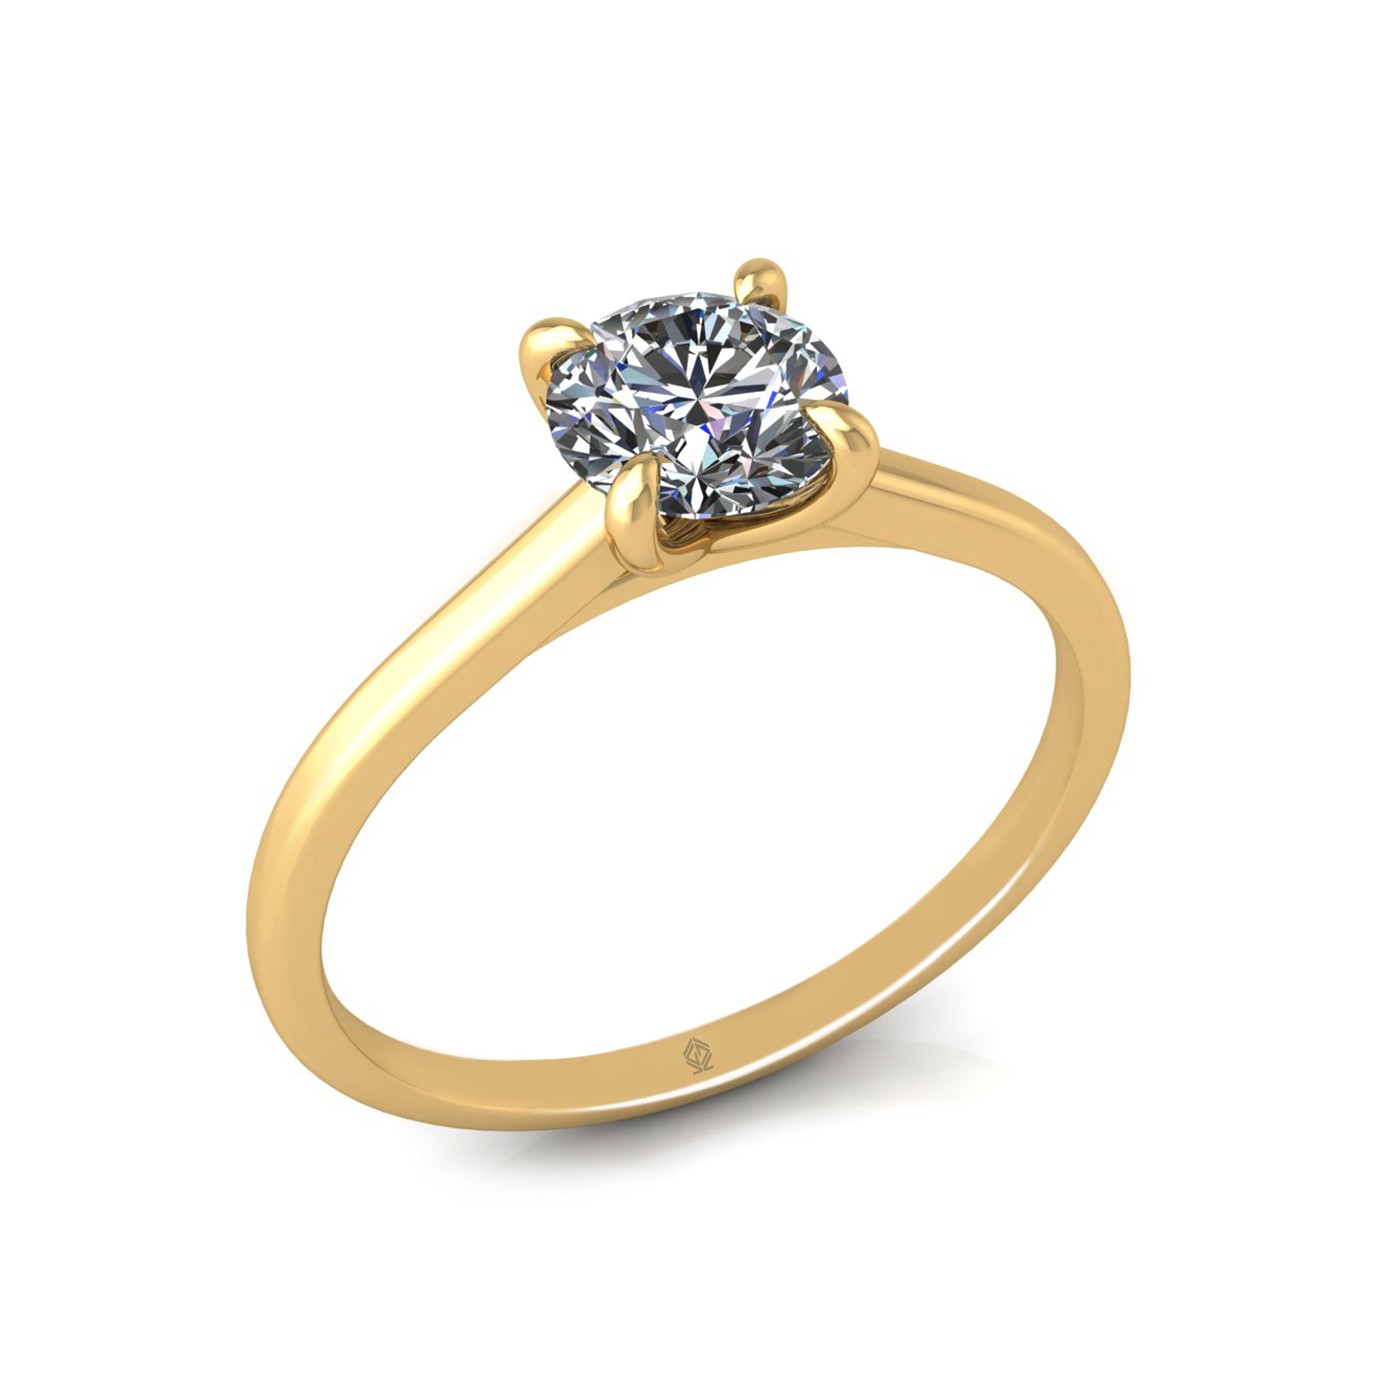 18k yellow gold 0,80 ct 4 prongs solitaire round cut diamond engagement ring with whisper thin band